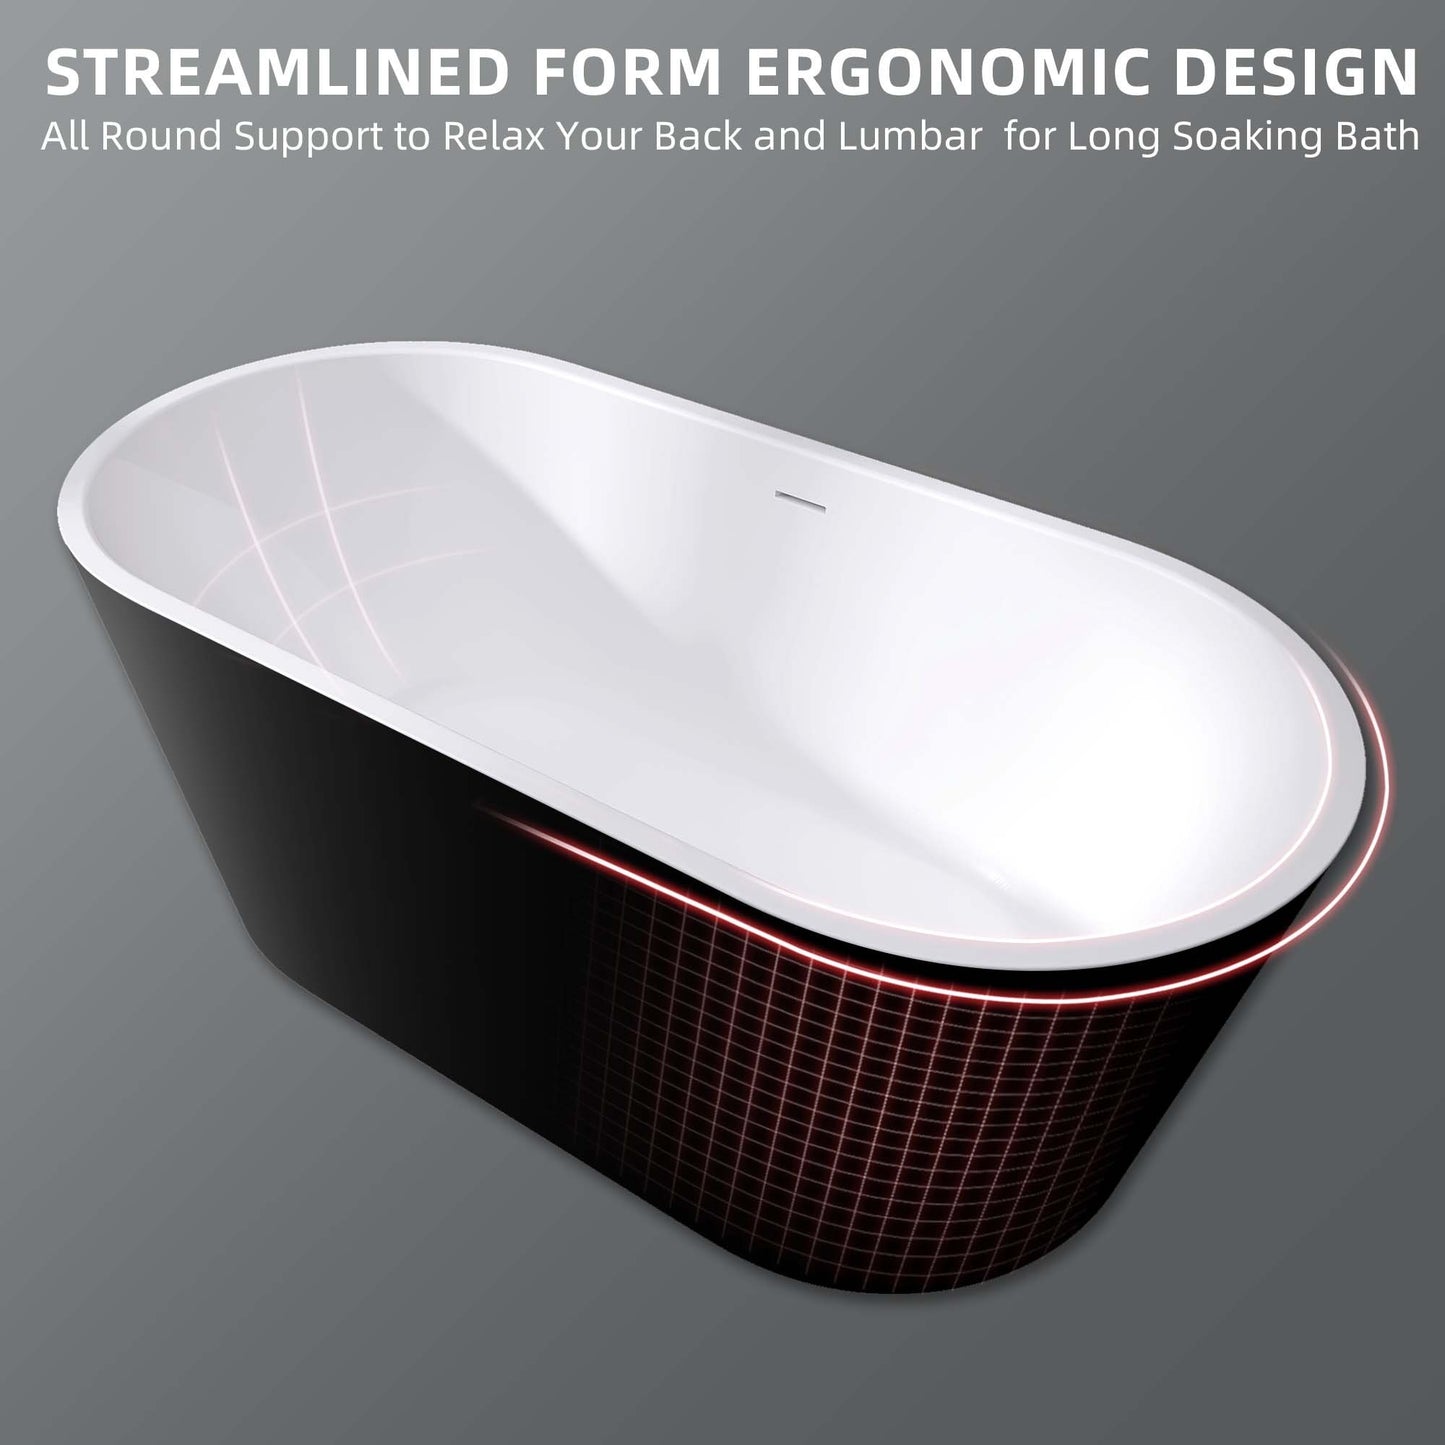 59" Acrylic Free Standing Tub - Classic Oval Shape Soaking Tub, Adjustable Freestanding Bathtub with Integrated Slotted Overflow and Chrome Pop-up Drain Anti-clogging Gloss Black